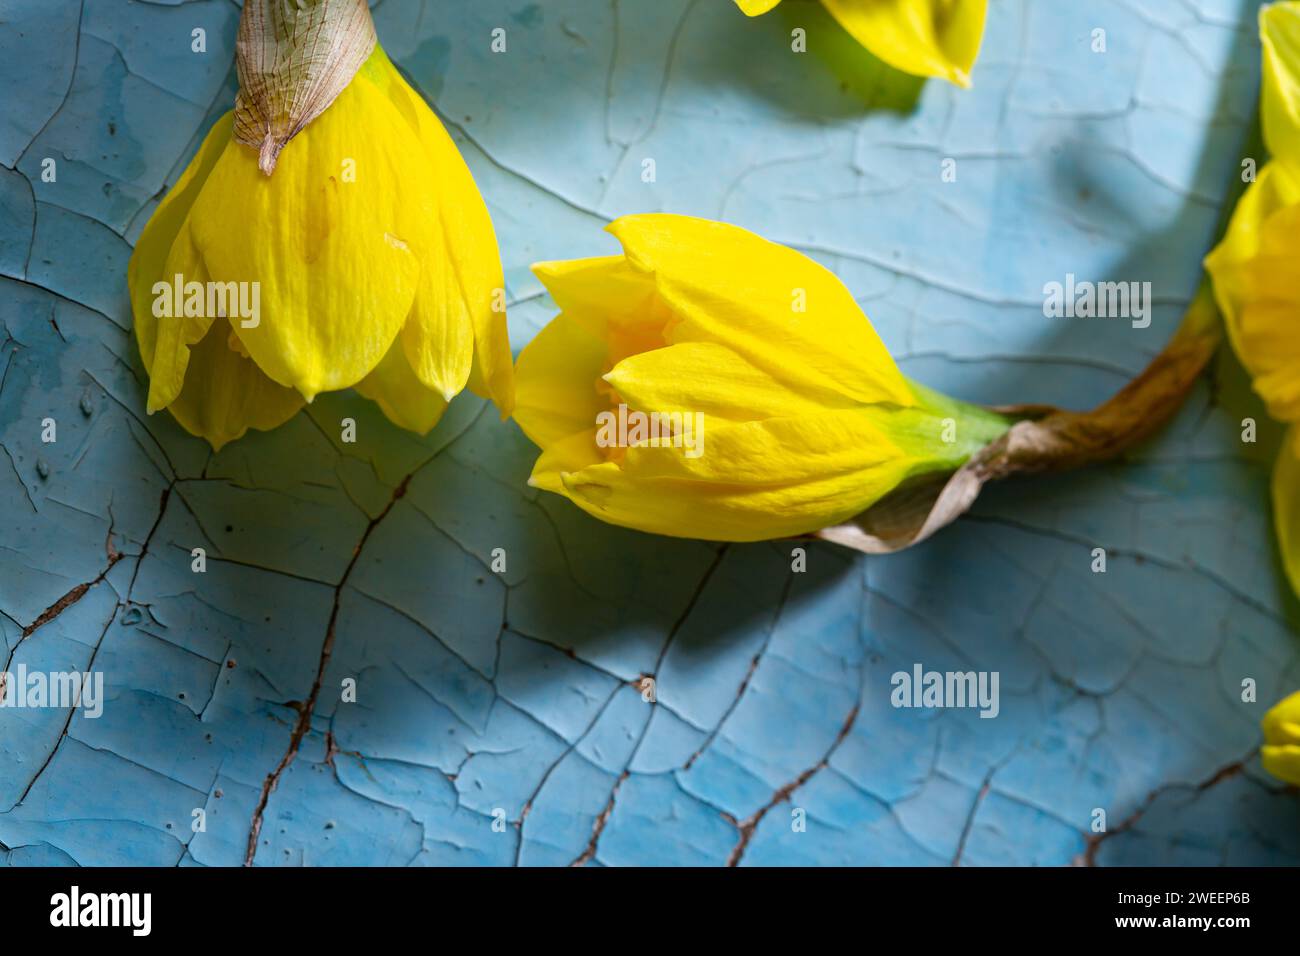 Top view of yellow spring narcissus flowers Stock Photo